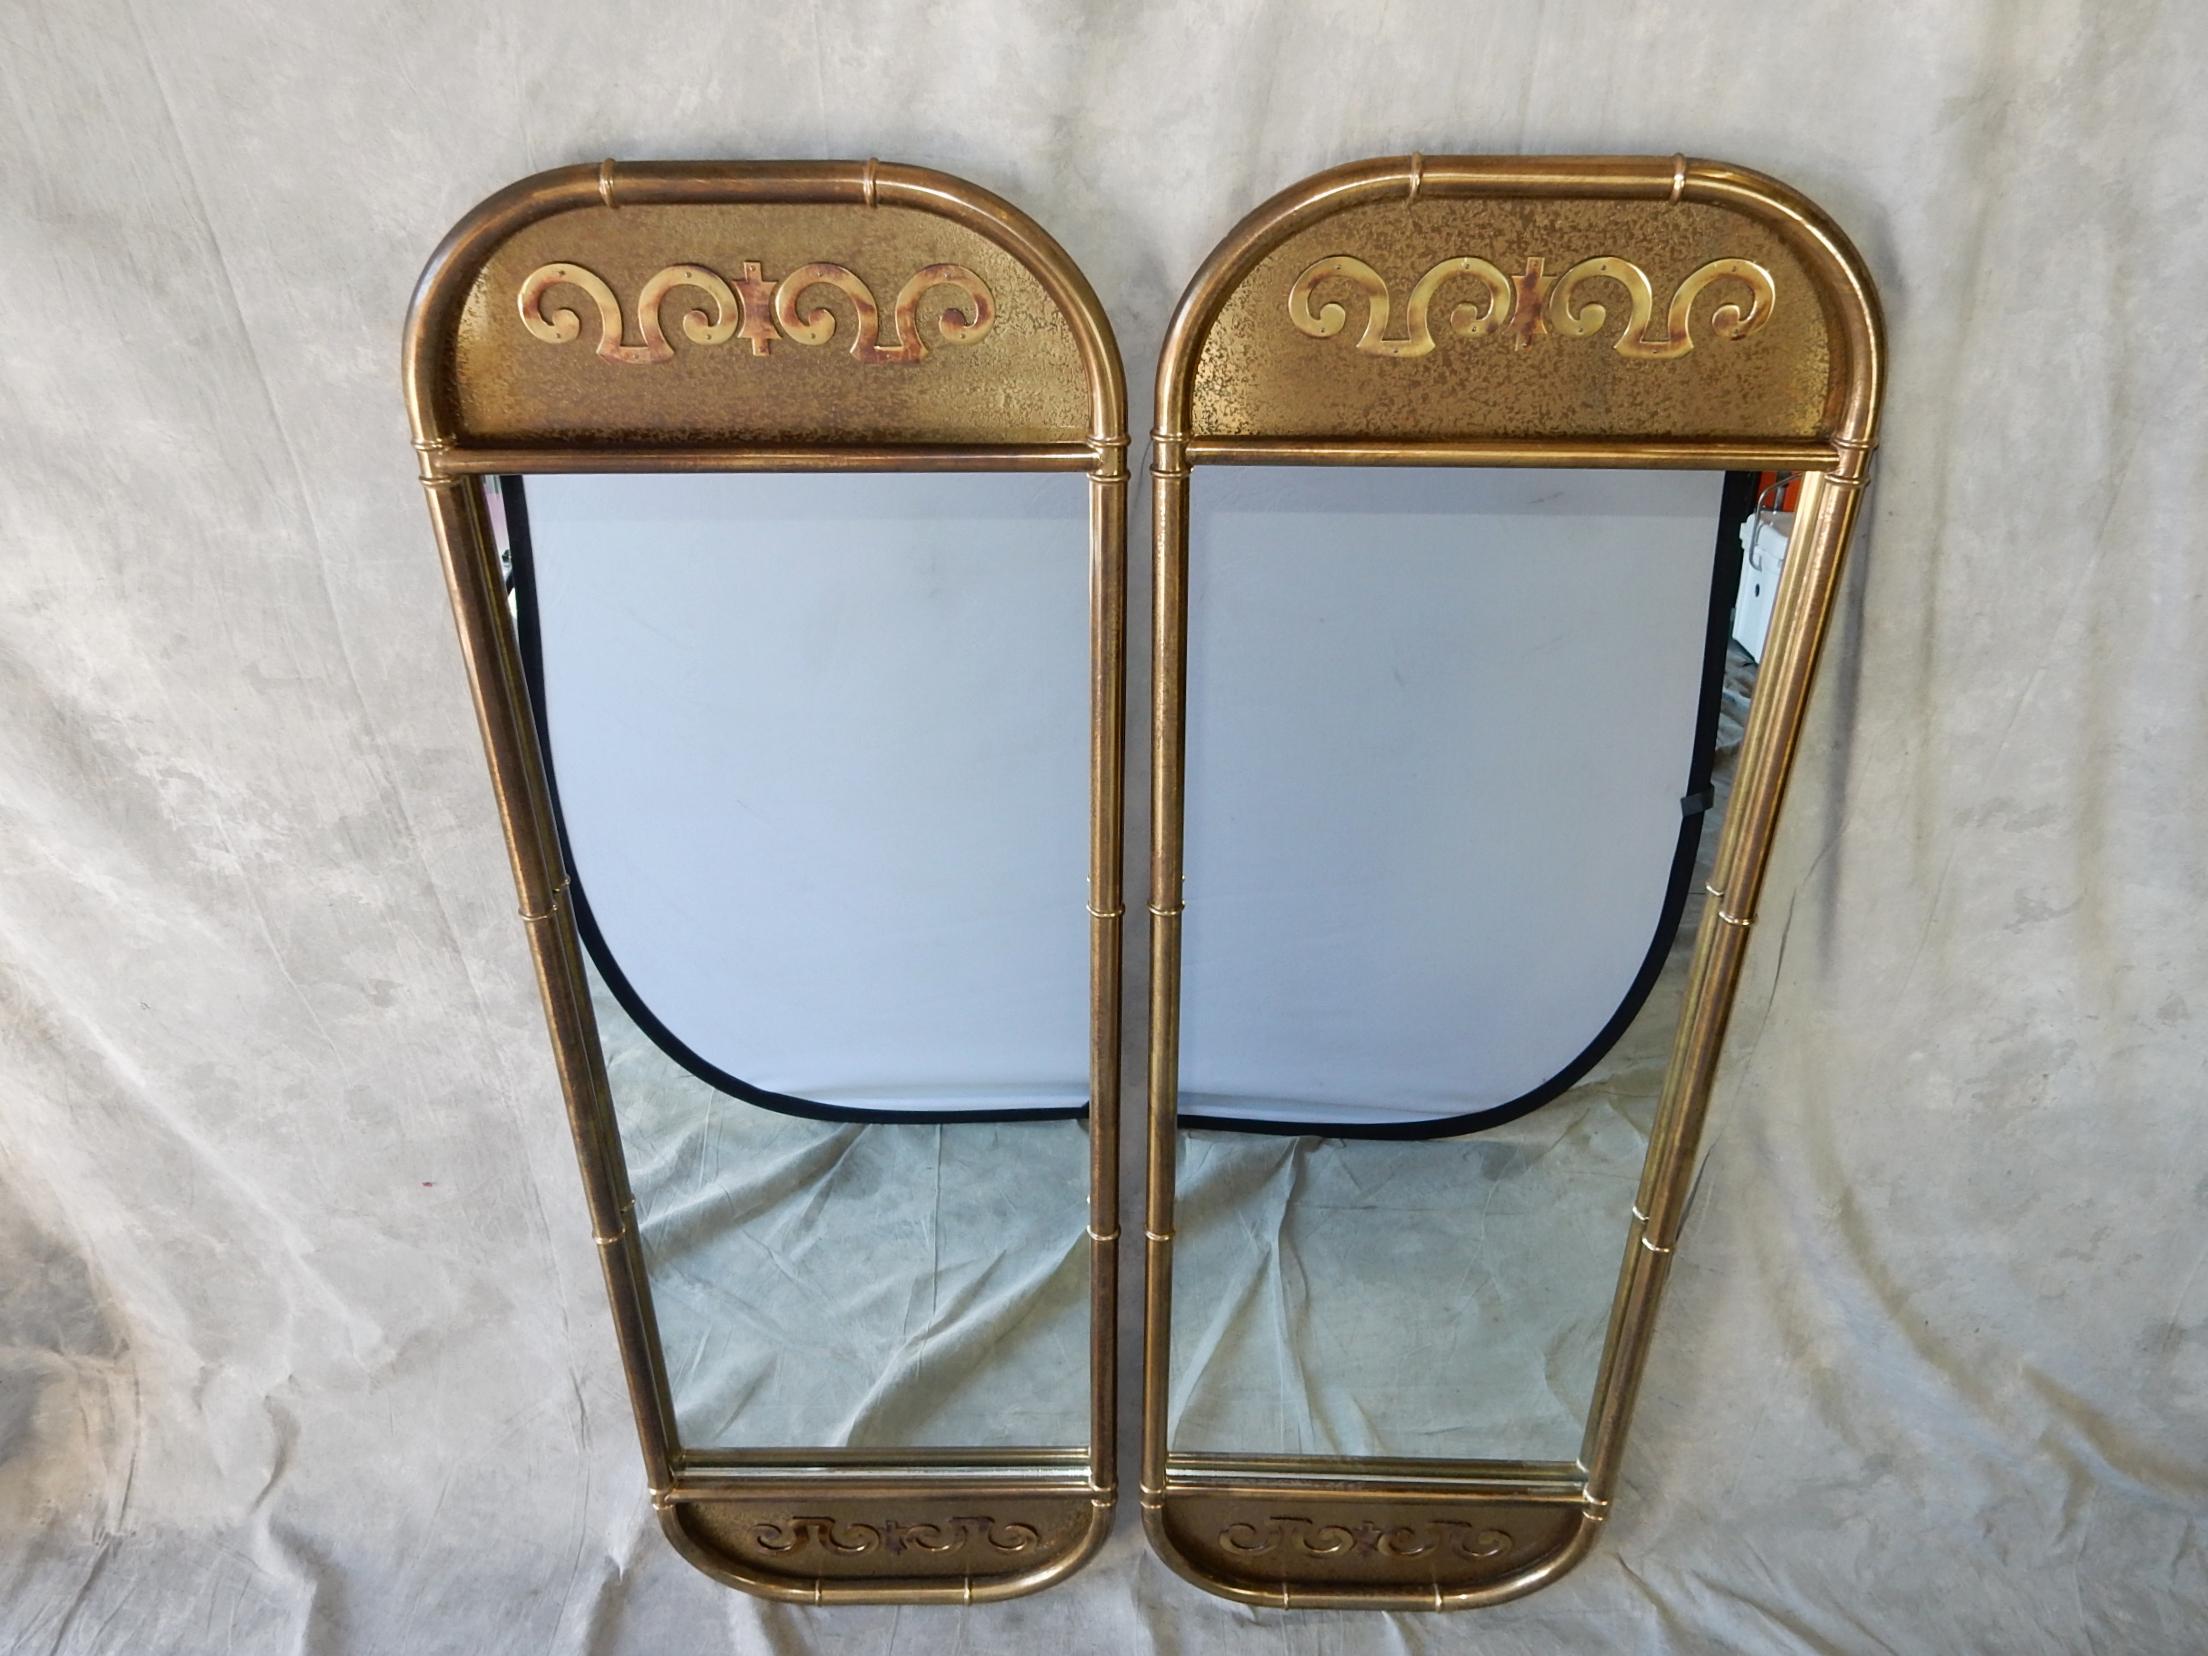 Lovely pair of tall faux bamboo brass wall mirrors by Mastercraft Furniture.
Both are identical and fabulous. Scrolling relief on both top and bottom.. 
They hang individually on picture wire. Can be used separate or together.